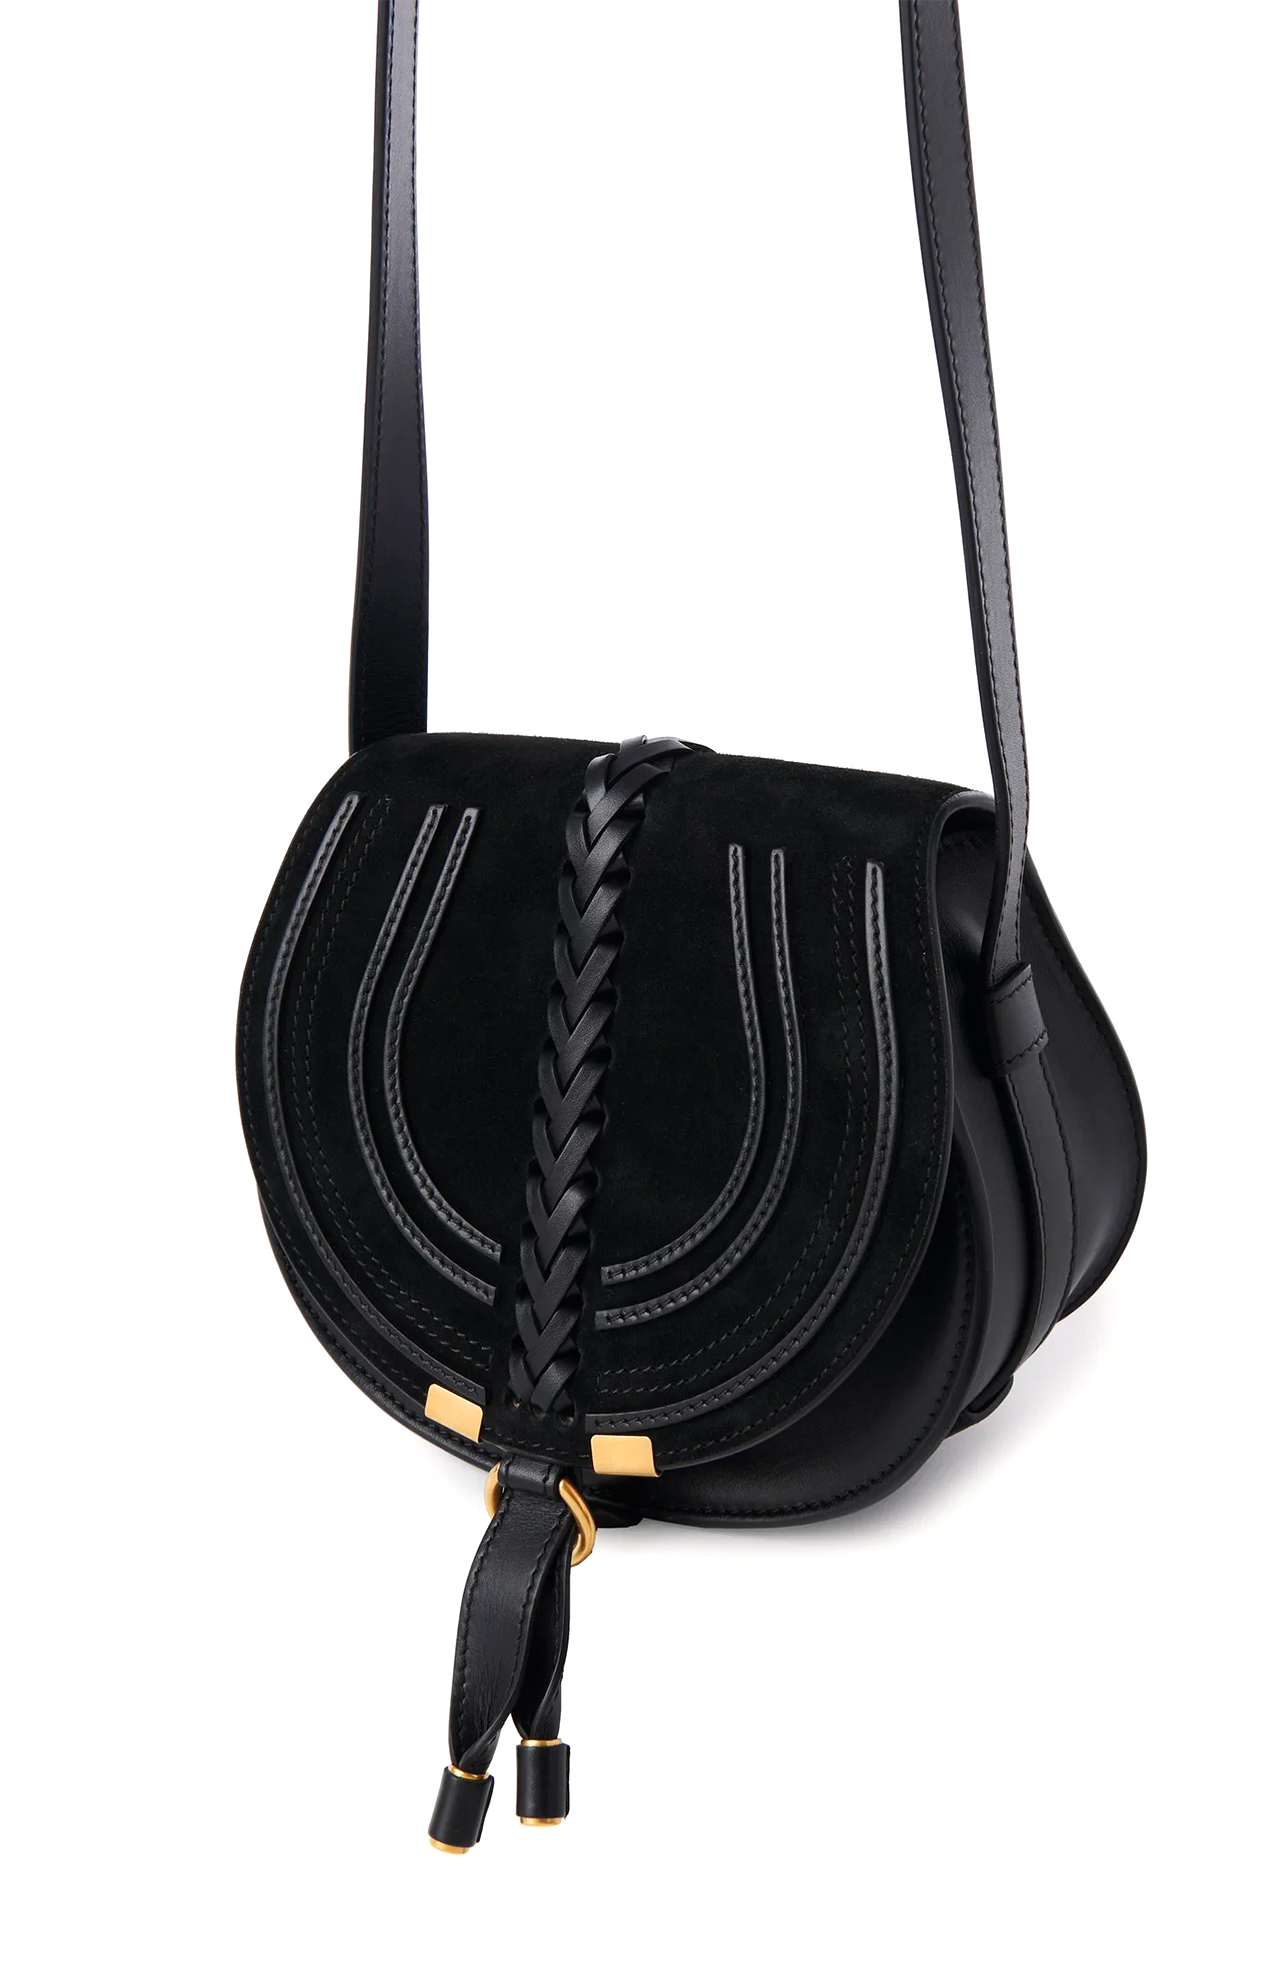 Chloé Women's Small Marcie Suede & Leather Saddle Bag - Black